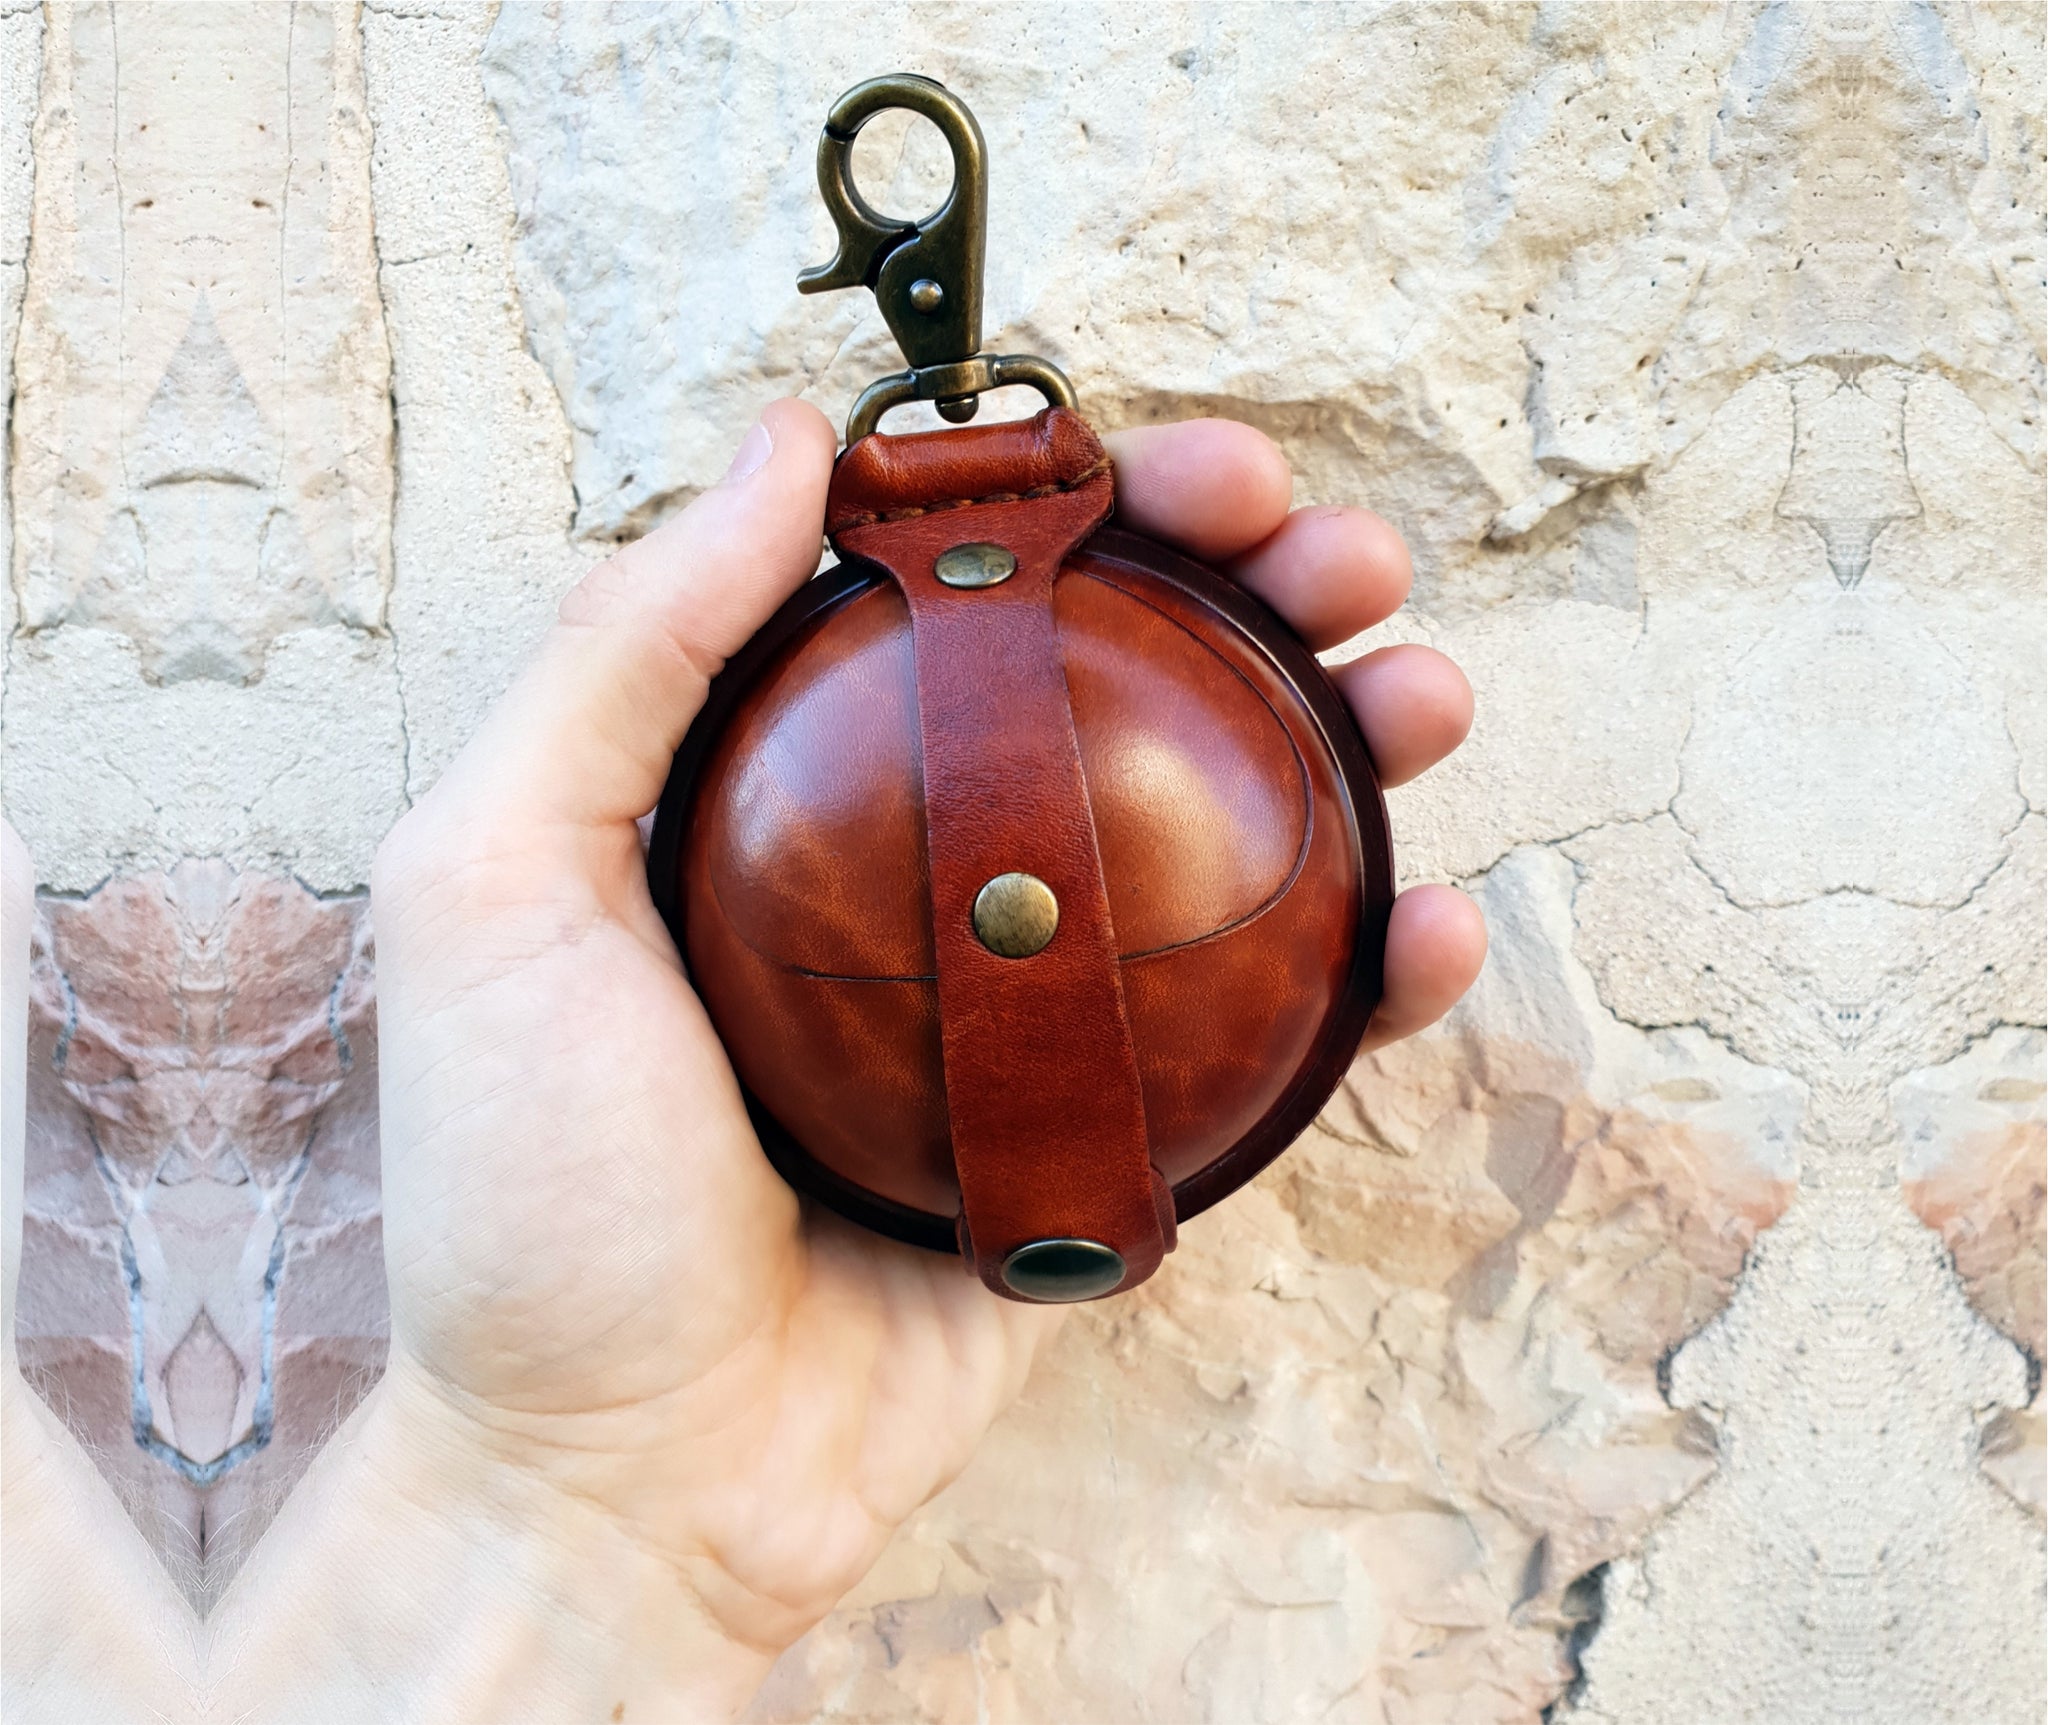 This unisex bestseller leather coin purse is handmade with sturdy Italian leather. It`s ball-shaped, lightweight with a clean cut, and can be attached to your bag, keychain, belt loops, or strap. The perfect coin pouch, earbuds case, keyholder wallet, change purse, and gift for him or her.  